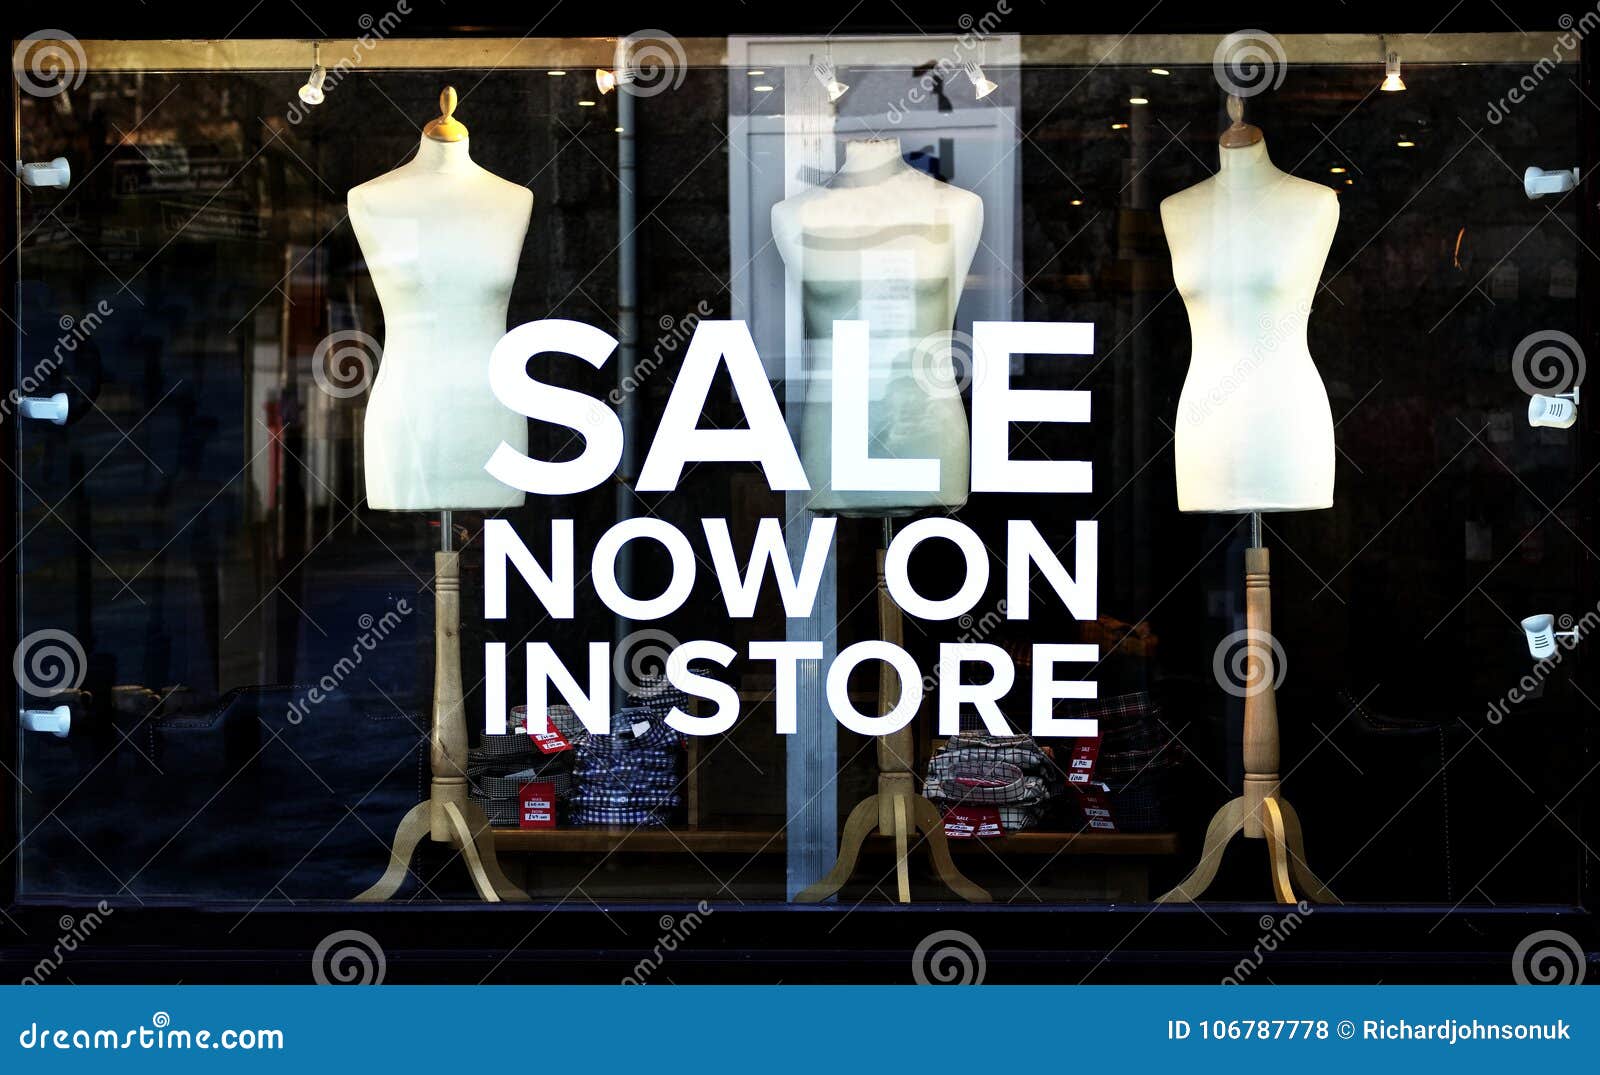 Sale Shop Mall Sign Illuminated at Night Clothes Shop Stock Photo - Image  of money, clothes: 106787778